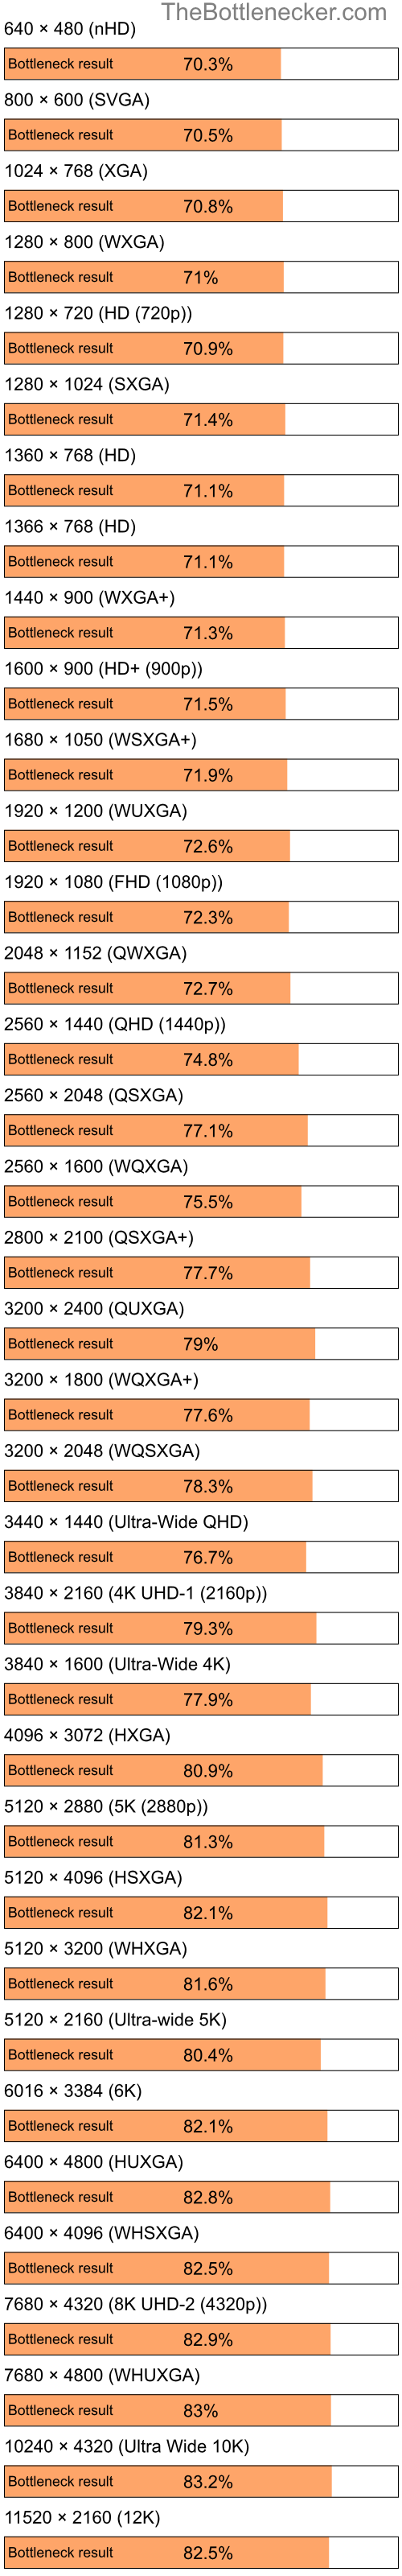 Bottleneck results by resolution for Intel Atom Z520 and AMD Radeon X800 GTO in Graphic Card Intense Tasks